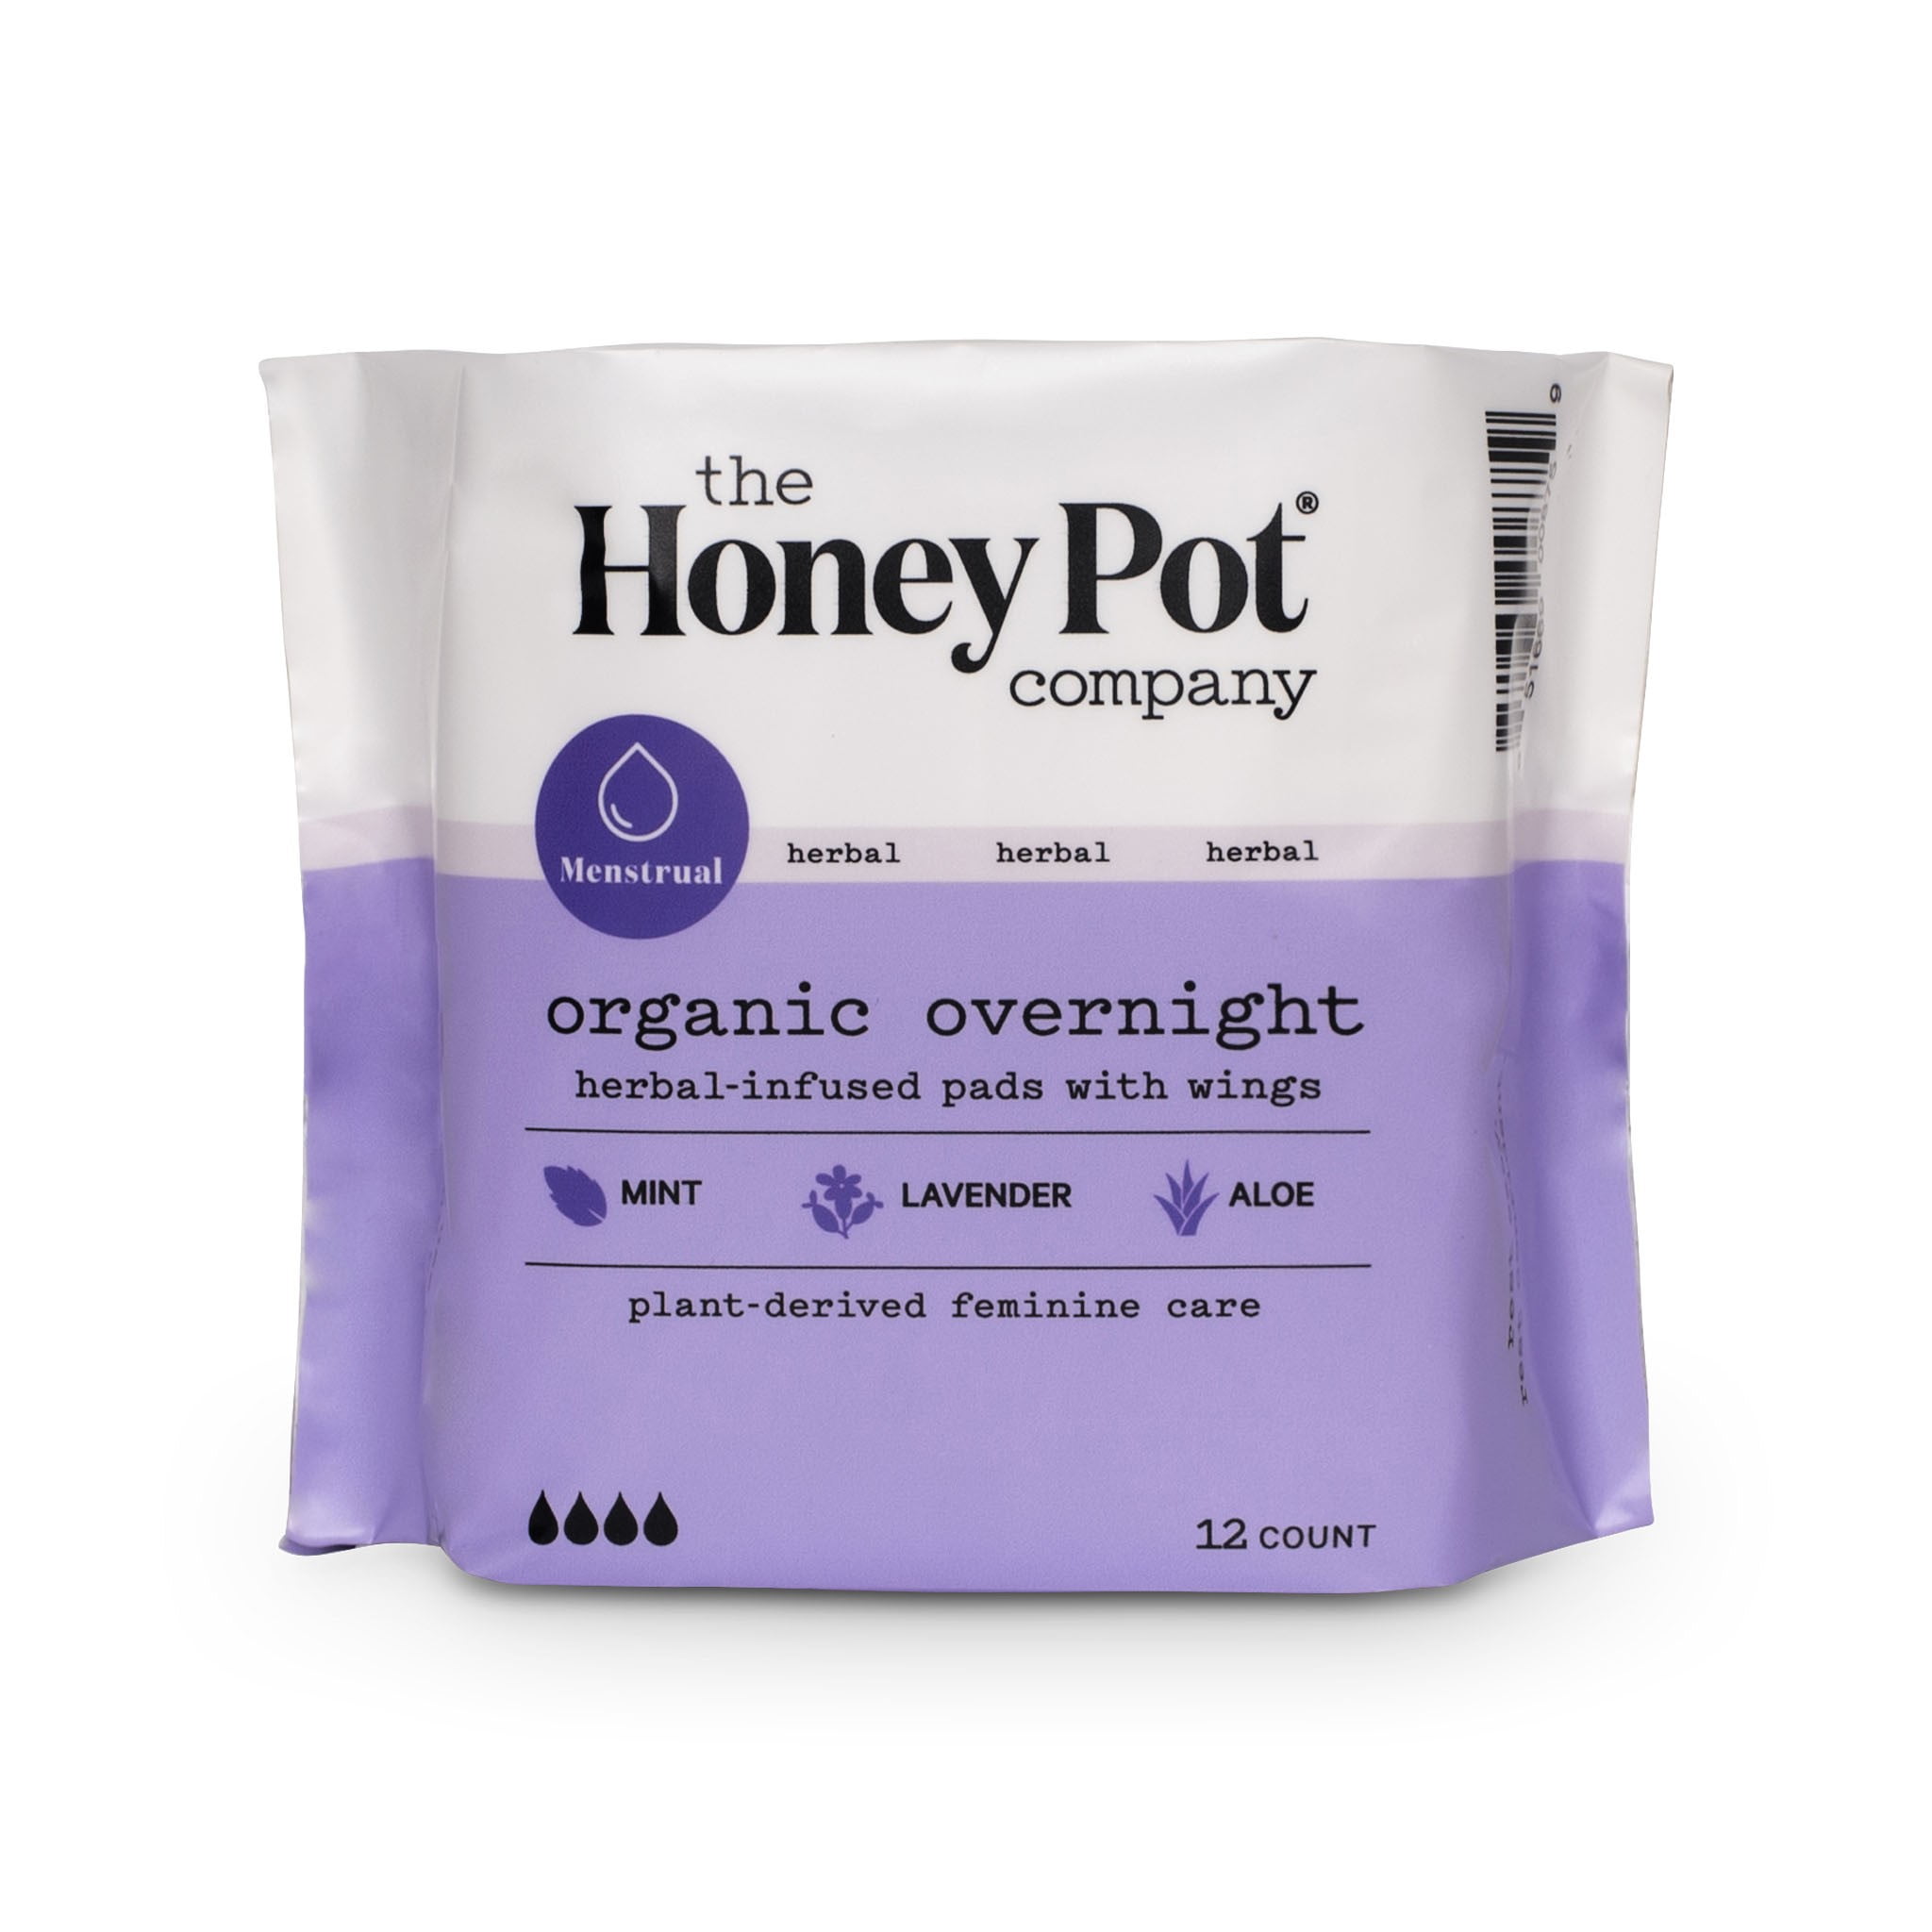 The Honey Pot Company, Overnight Protection Pads with Wings, Organic Cotton, Herbal-Infused,12 ct.